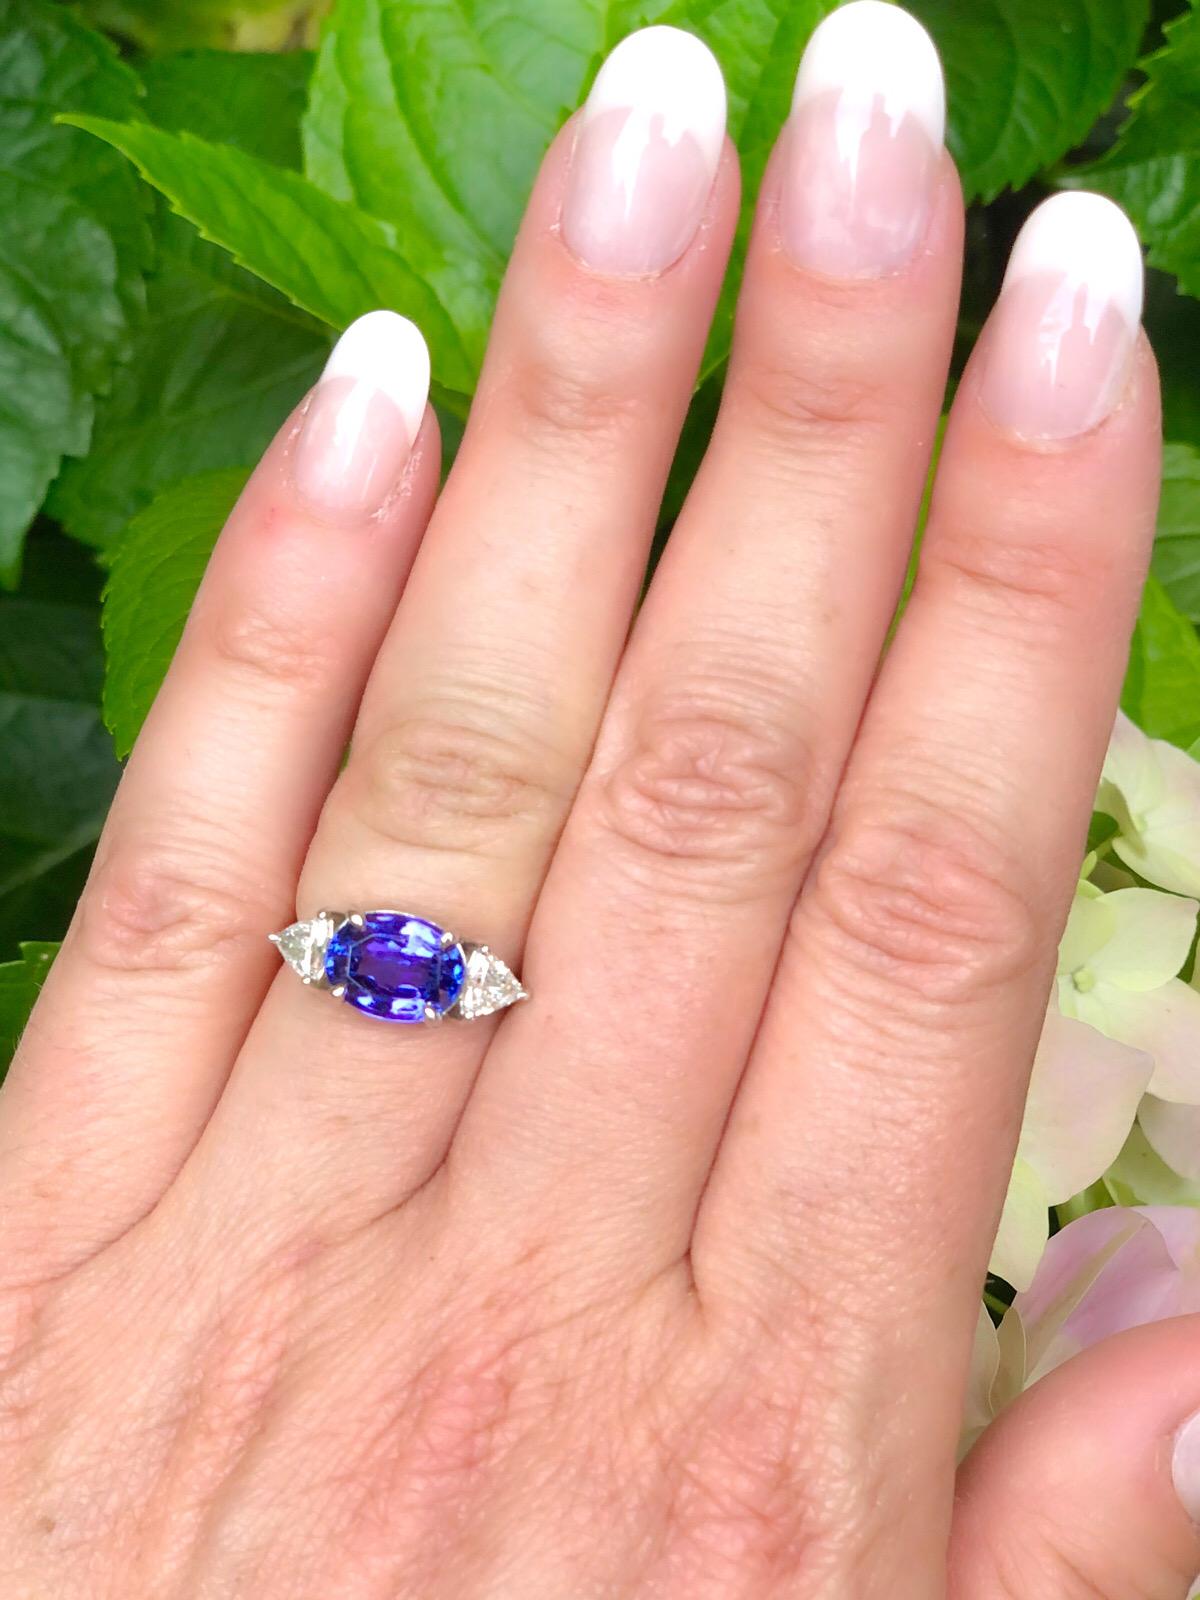 Blending contemporary and classic design, this eye-catching ring features a horizontally-set 3.40- cts. oval tanzanite, set on each side with two triangular-cut diamonds, weighing together approximately 0.55-ct. The 18k white gold ring weighs 3.8